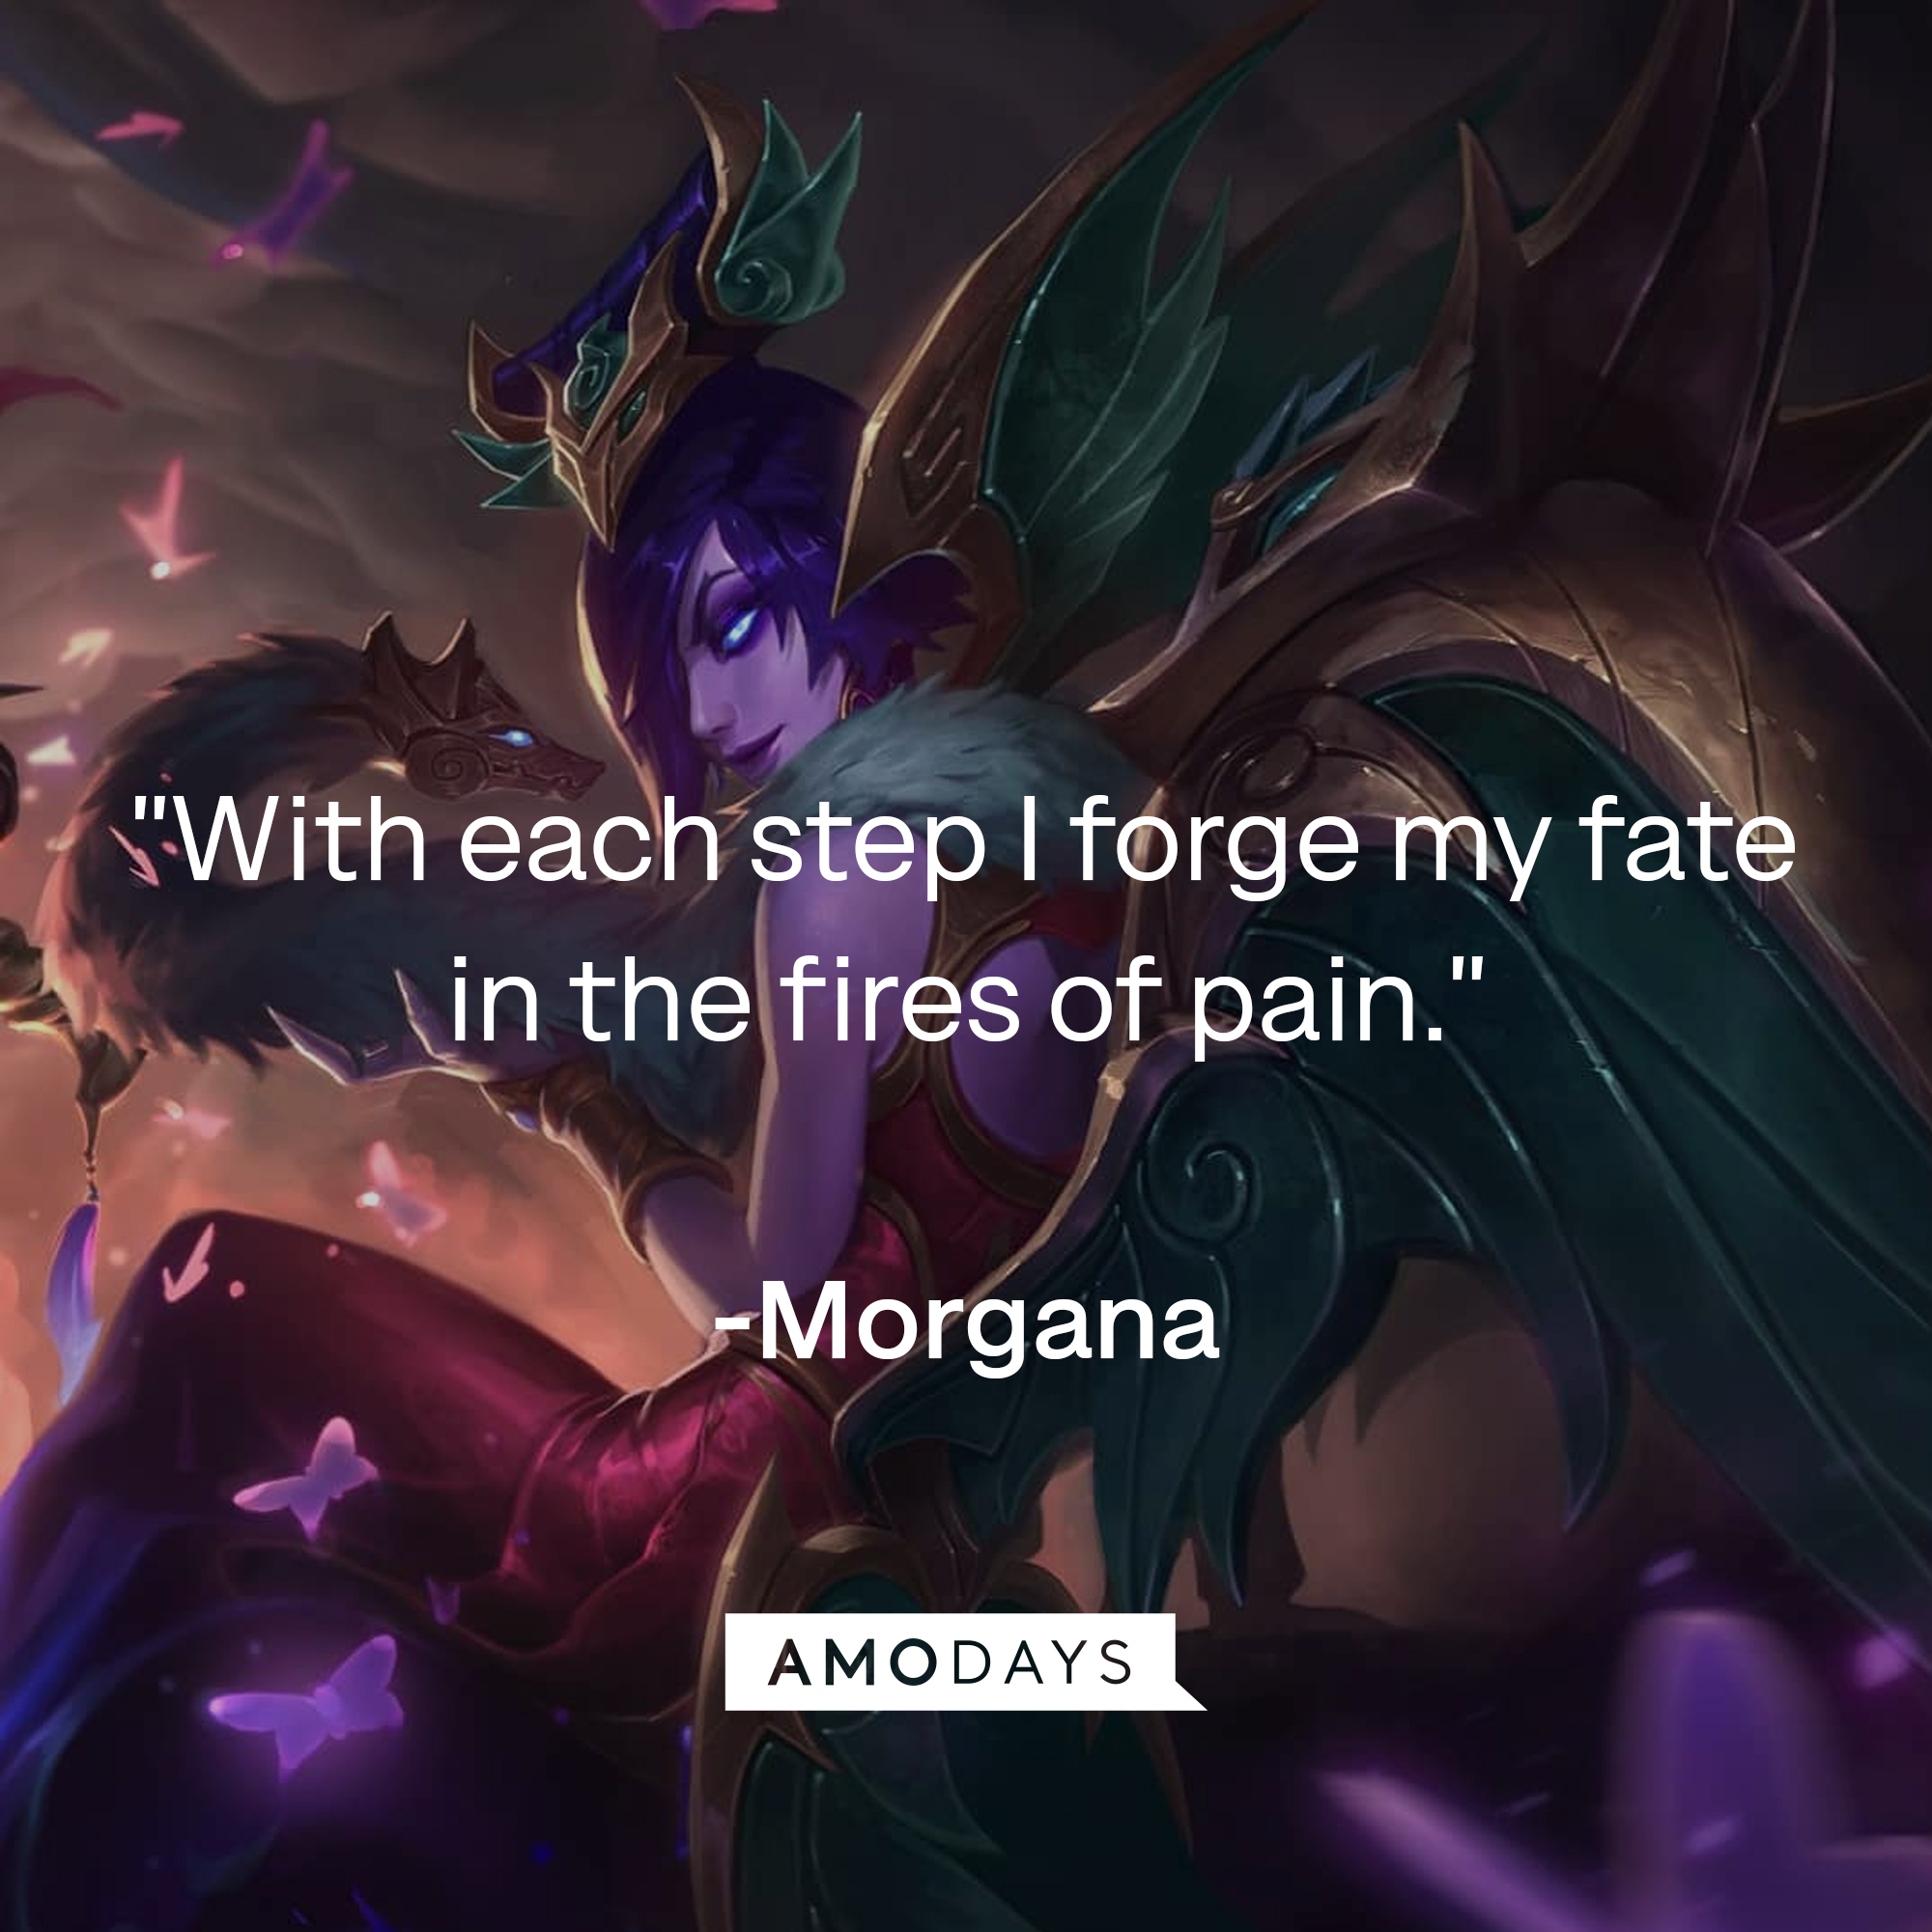 An image of Morgana, with her quote: "With each step I forge my fate in the fires of pain." | Source: Facebook.com/leagueoflegends